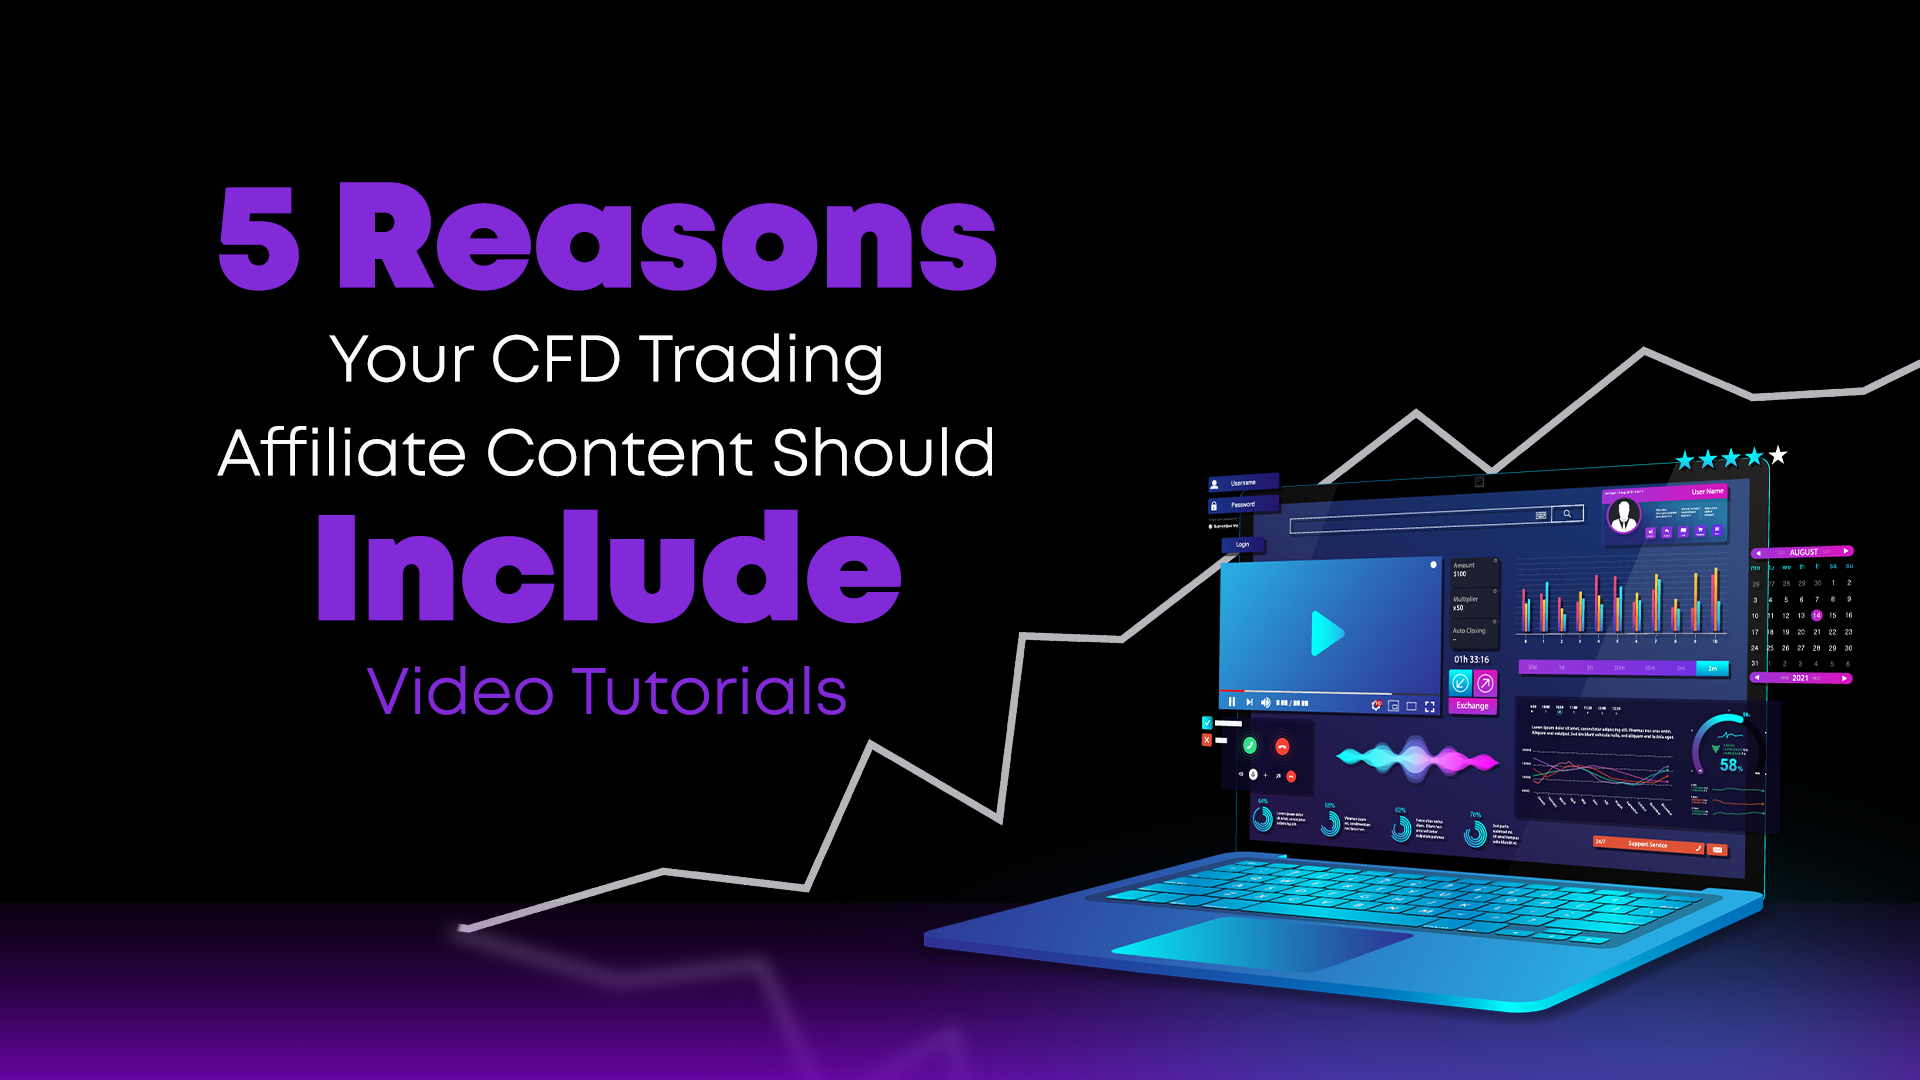 The importance of video tutorials for cfd trading